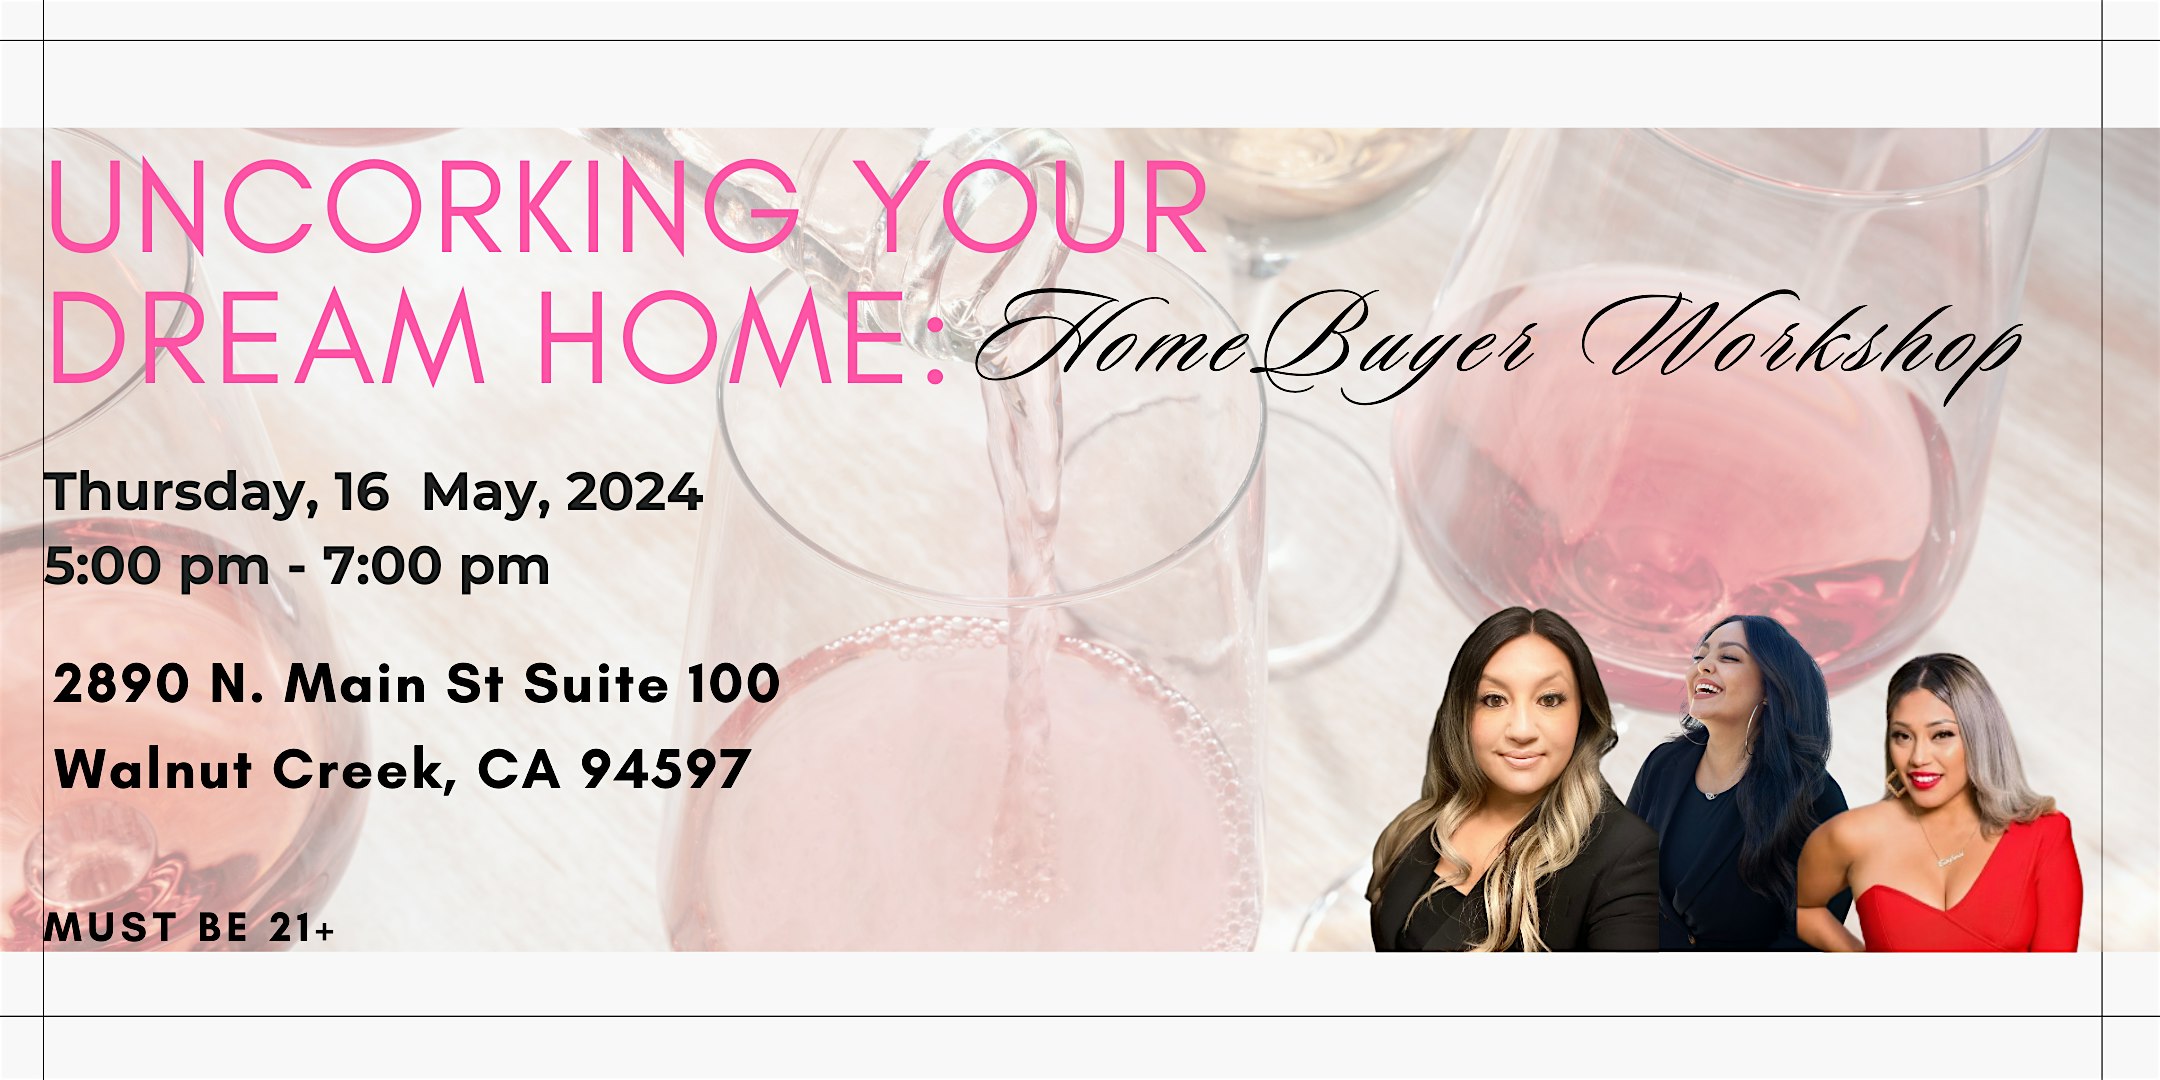 Uncorking your dream home: Home Buyer Workshop